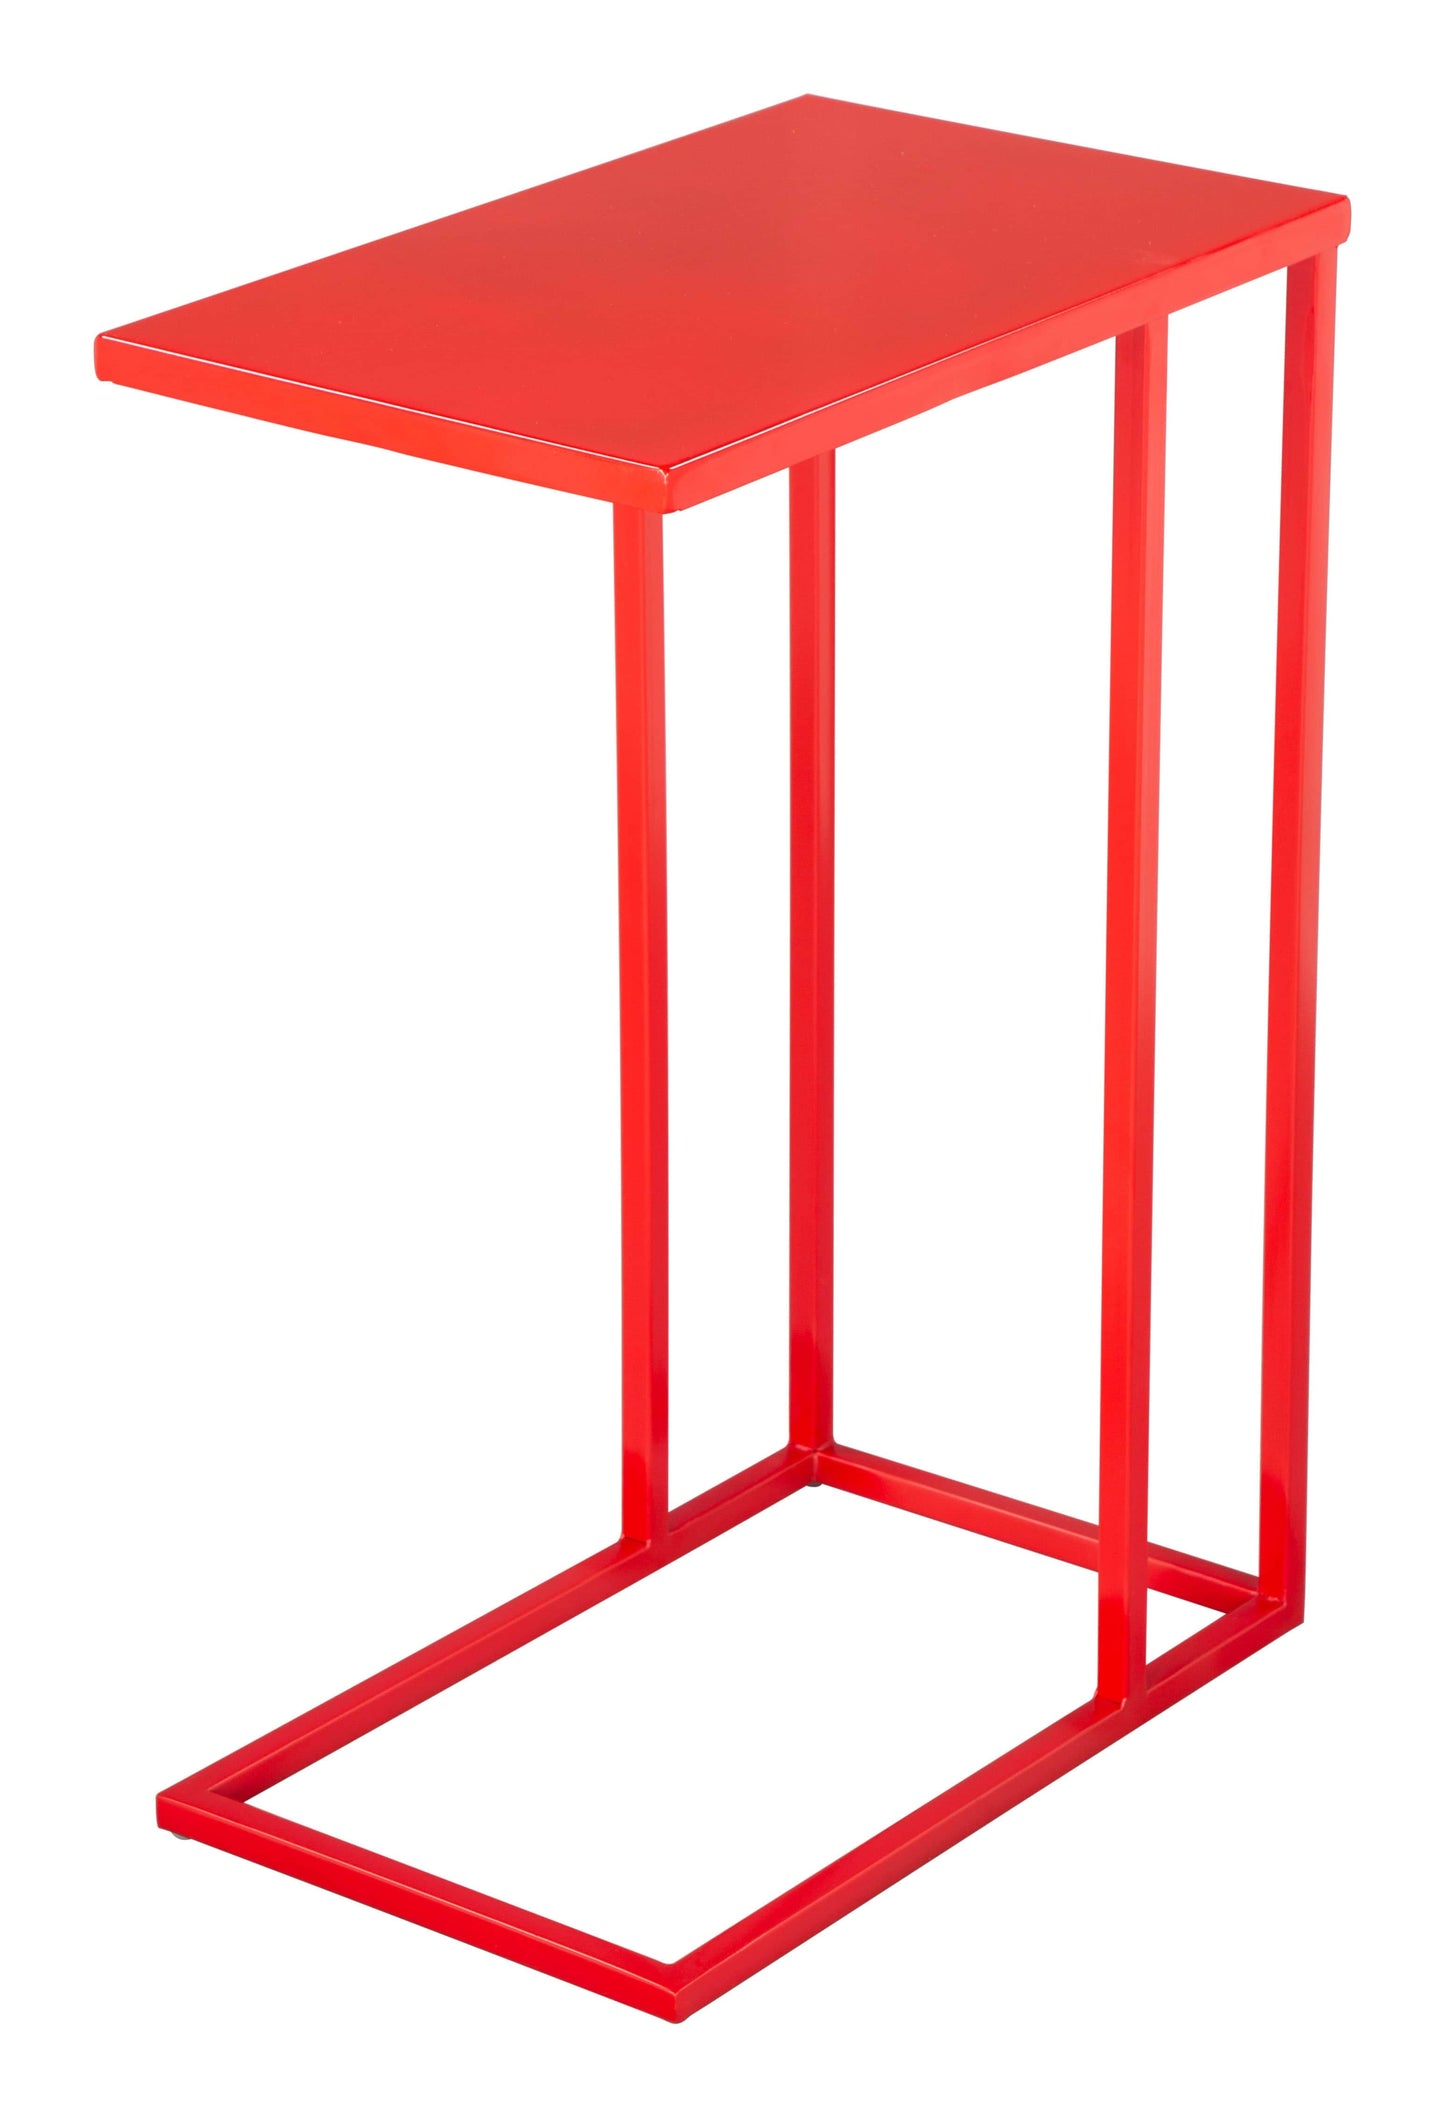 Angled View of Powder Coated Iron Table